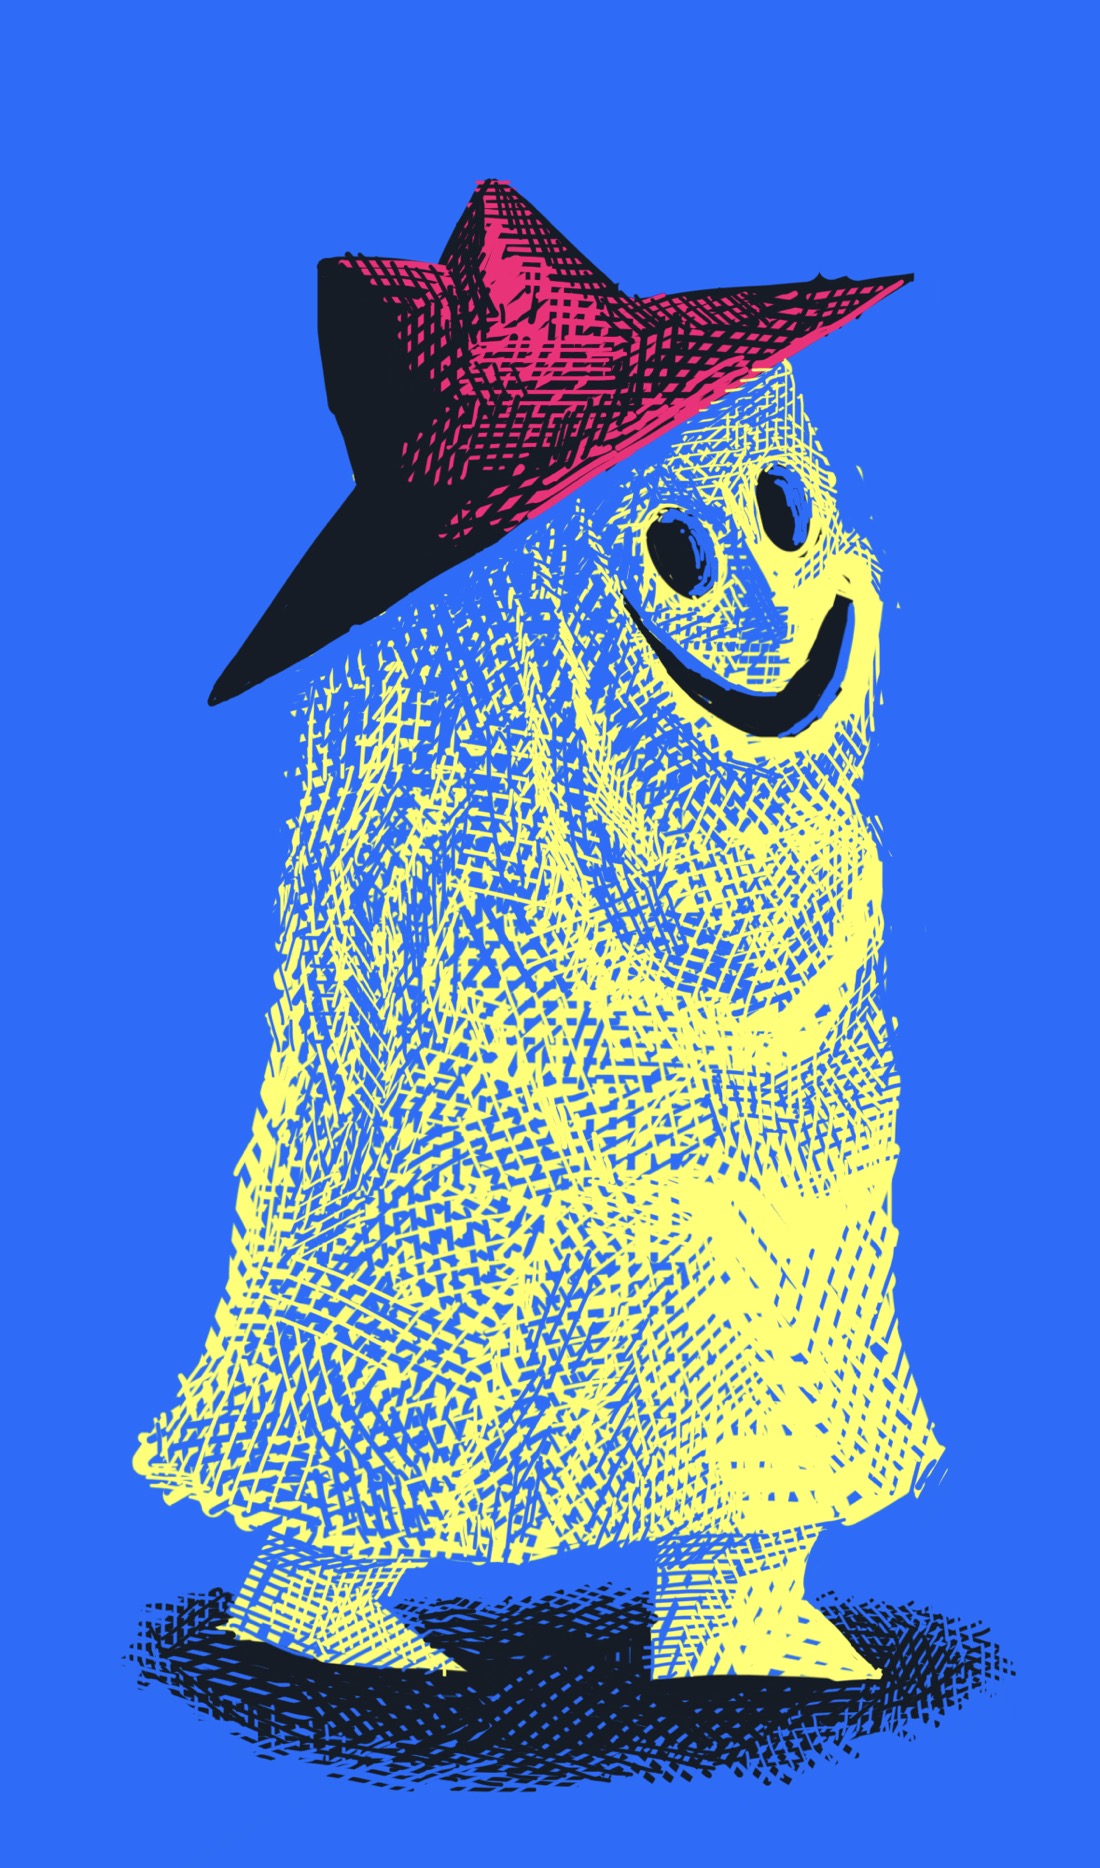 A figure that appears to be wearing a ghost costume made of a sheet. The figure is yellow, with no arms, and is also wearing a crimson broad-brimmed hat that looks like something a cartoon spy would wear. The figure's face is a simple smiley-face arrangement of two round holes for eyes and a smiling empty mouth.